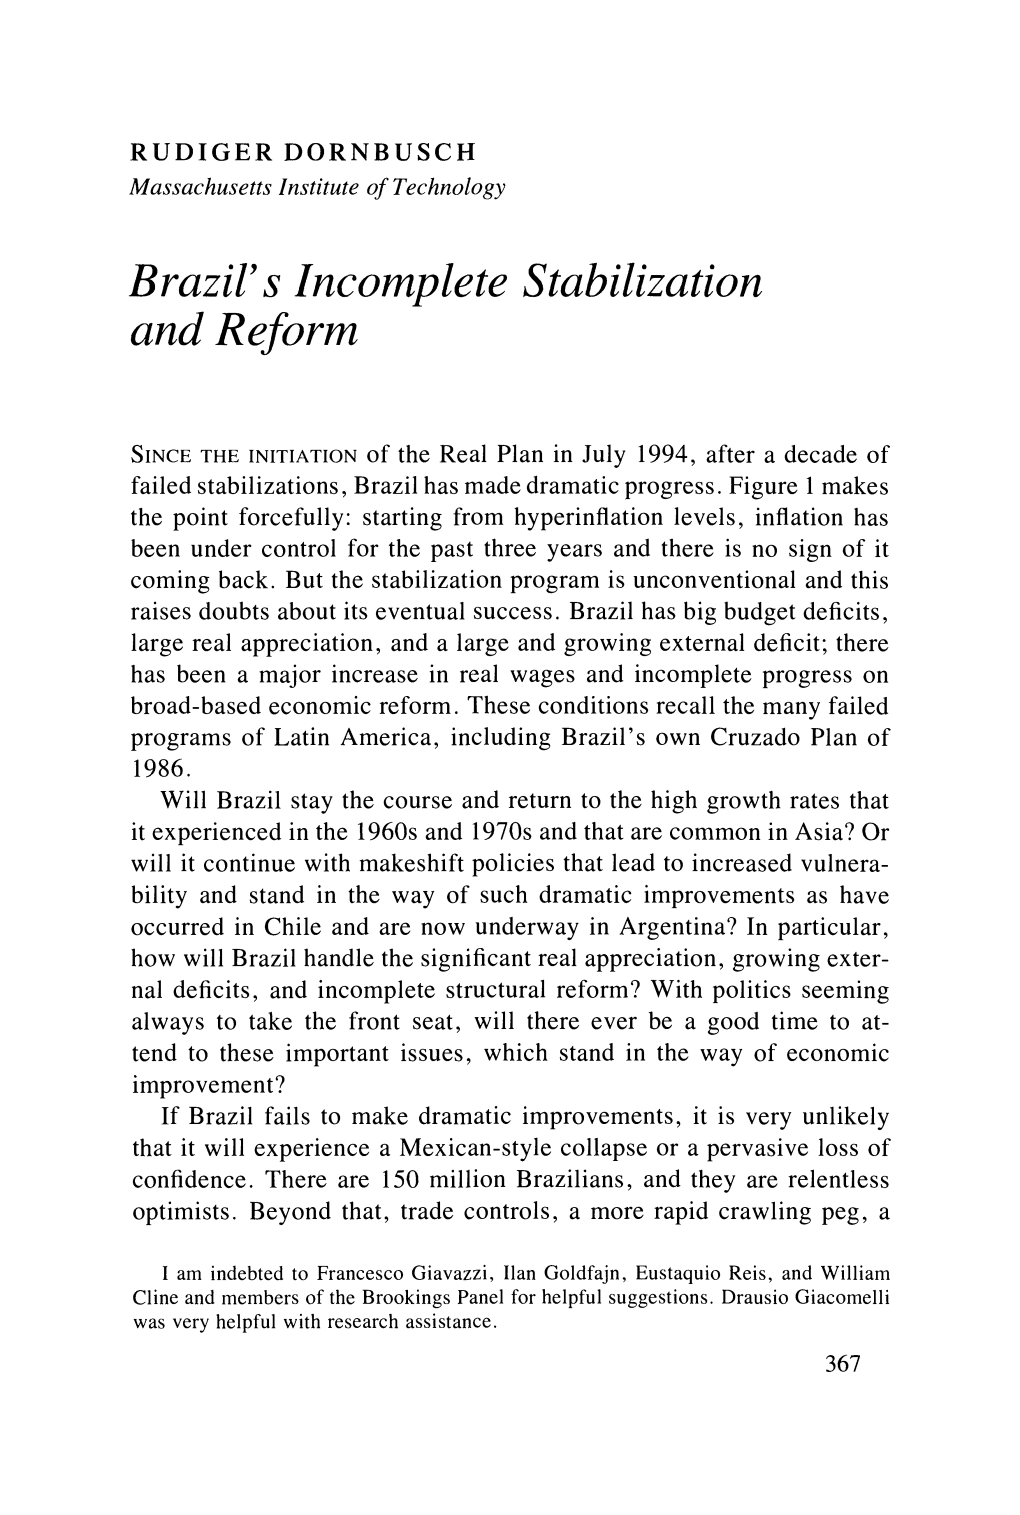 Brazil's Incomplete Stabilization and Reform